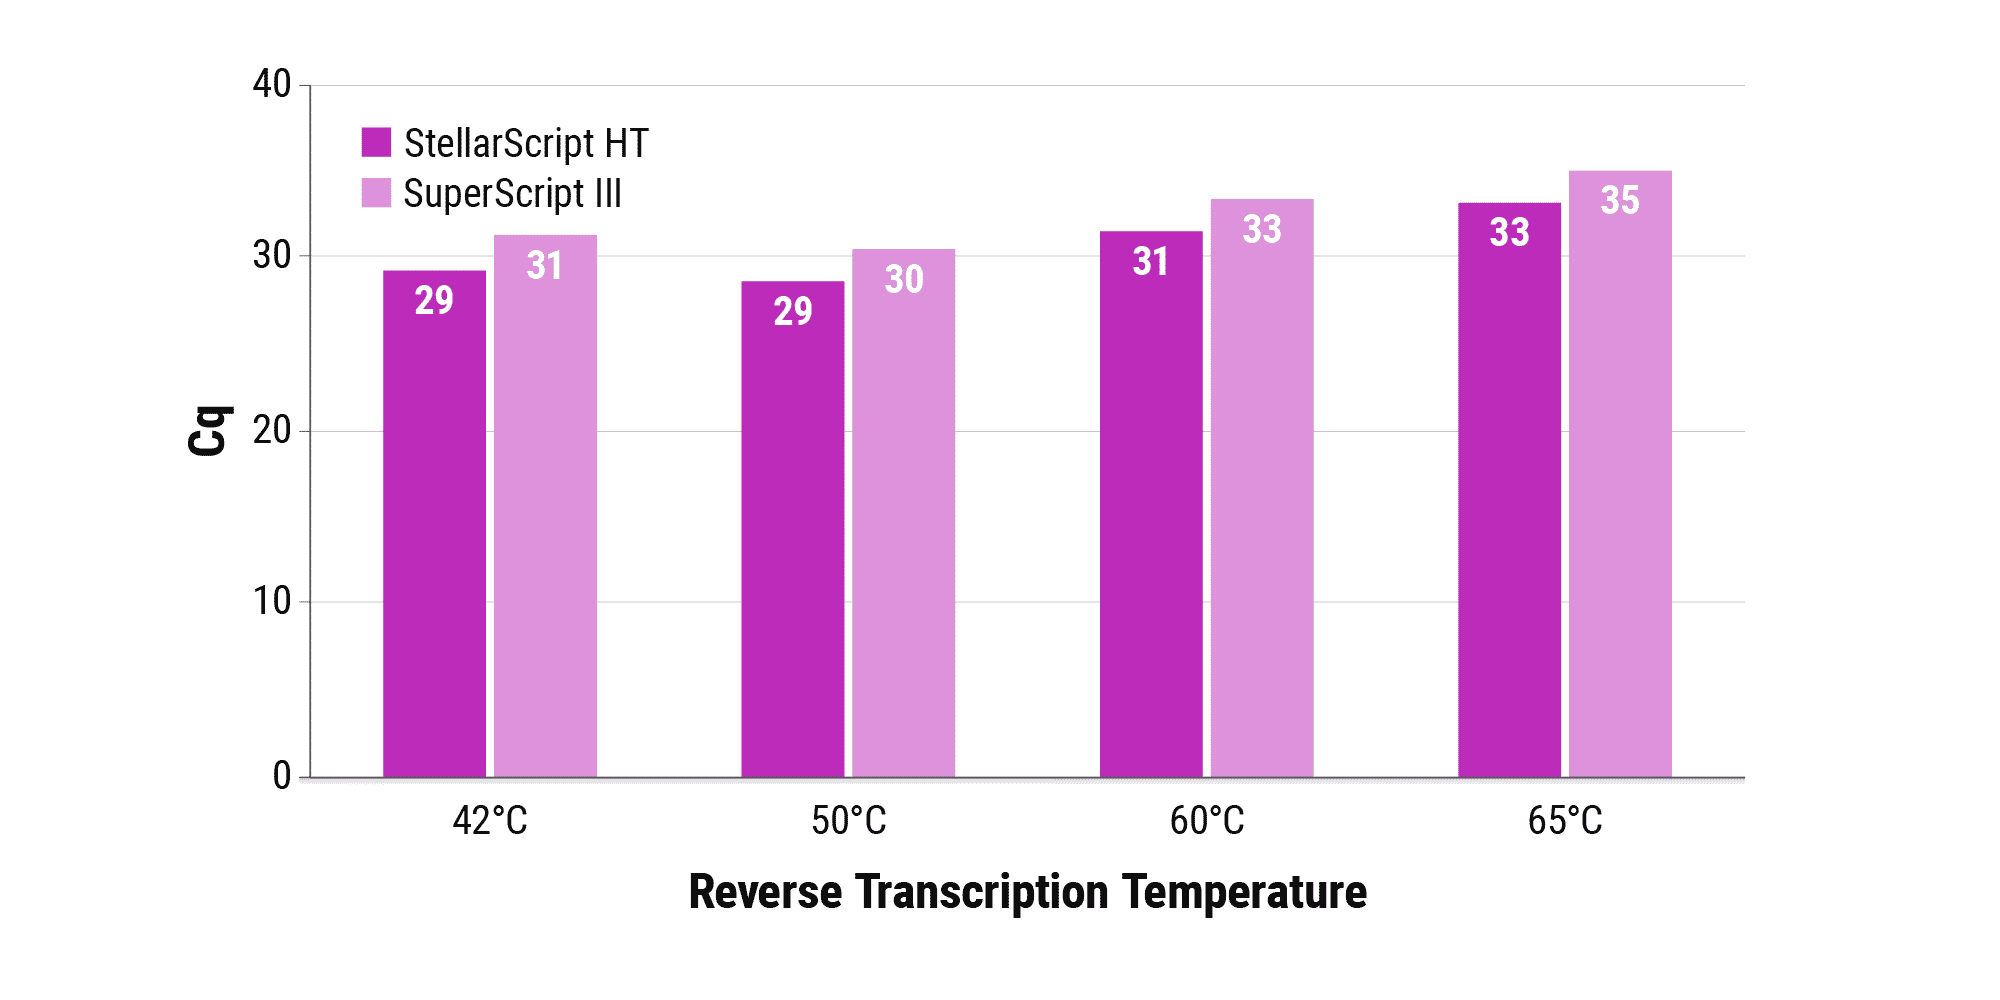 Figure 1A. Improved performance at elevated temperatures. Watchmaker’s StellarScript HT and ThermoFisher Scientific’s SuperScript III were run in oligo-dT-primed first strand synthesis at 42°C, 50°C, 60°C or 65°C for 25 minutes using 10 ng total liver RNA as template. Resulting cDNA mass was assessed via qPCR. StellarScript HT produced higher yields (indicated by lower Cq values) at any evaluated temperature than SuperScript III.